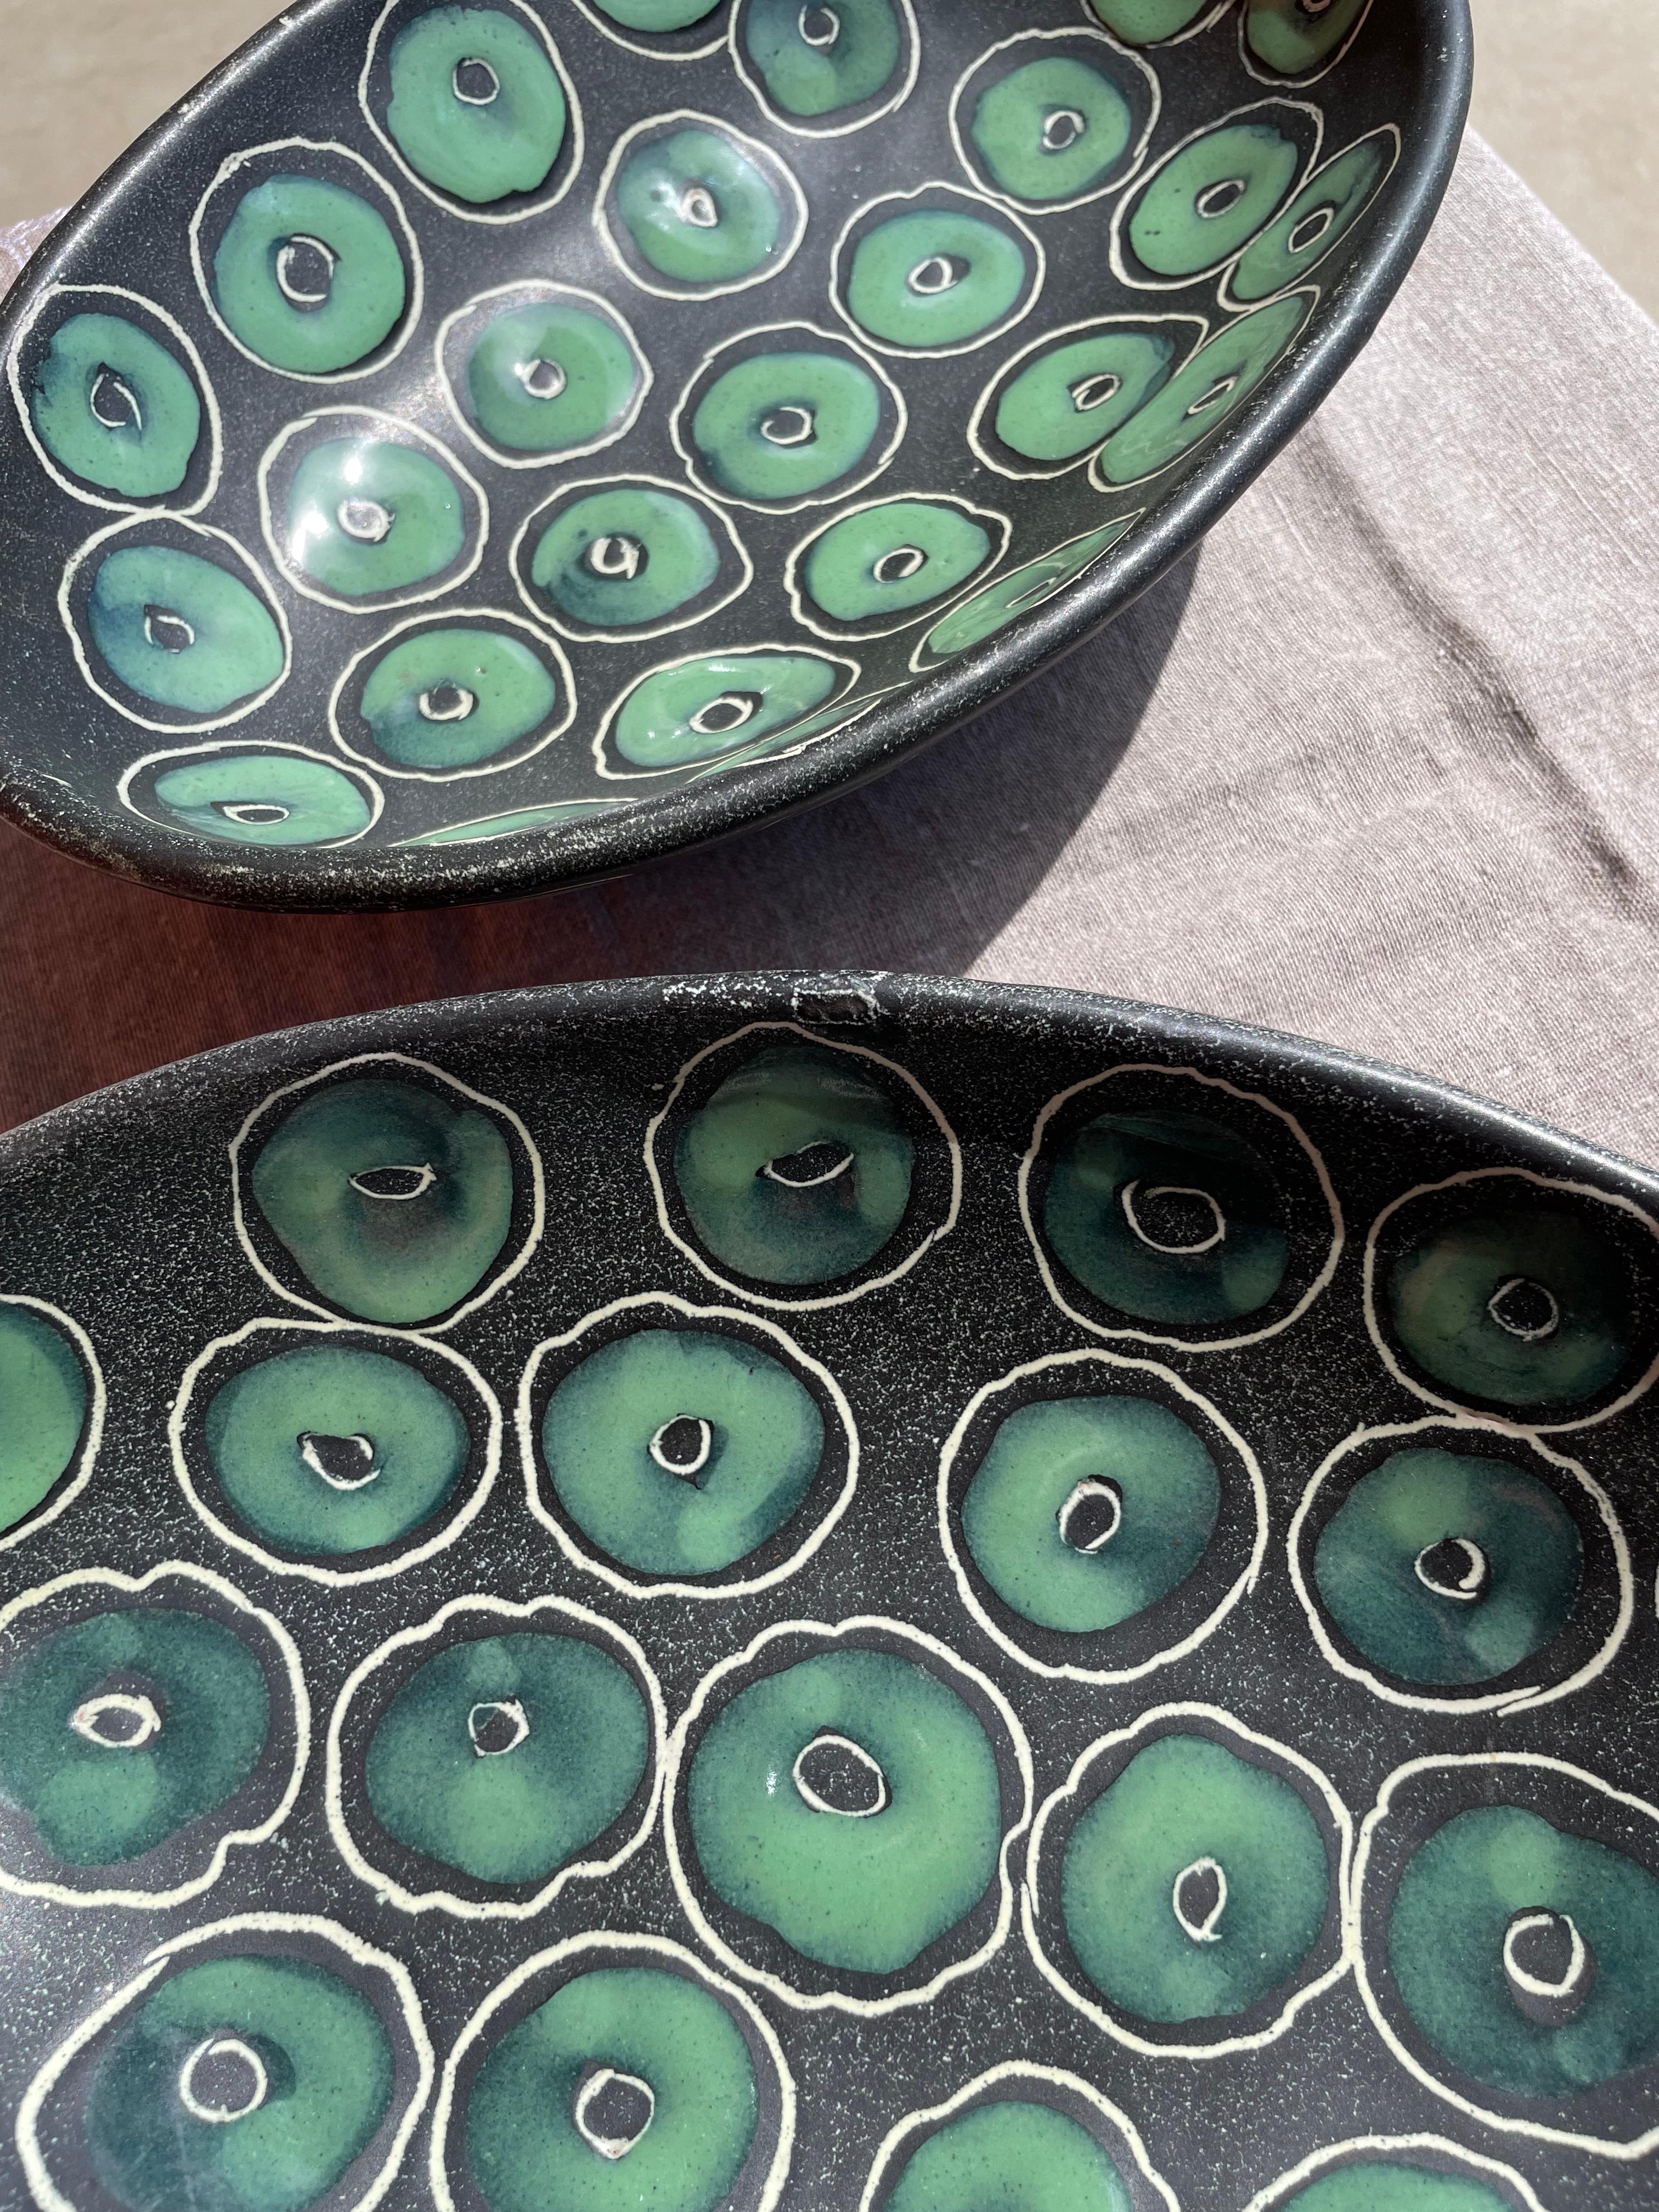 These 1950s Italian Ceramic Bowls are expertly crafted, being as they are strong and smooth. The piece was hand molded and hand painted. The design is organic and flowing, the paint rises ever so slightly to give a soft texture to the bowl. Italy in